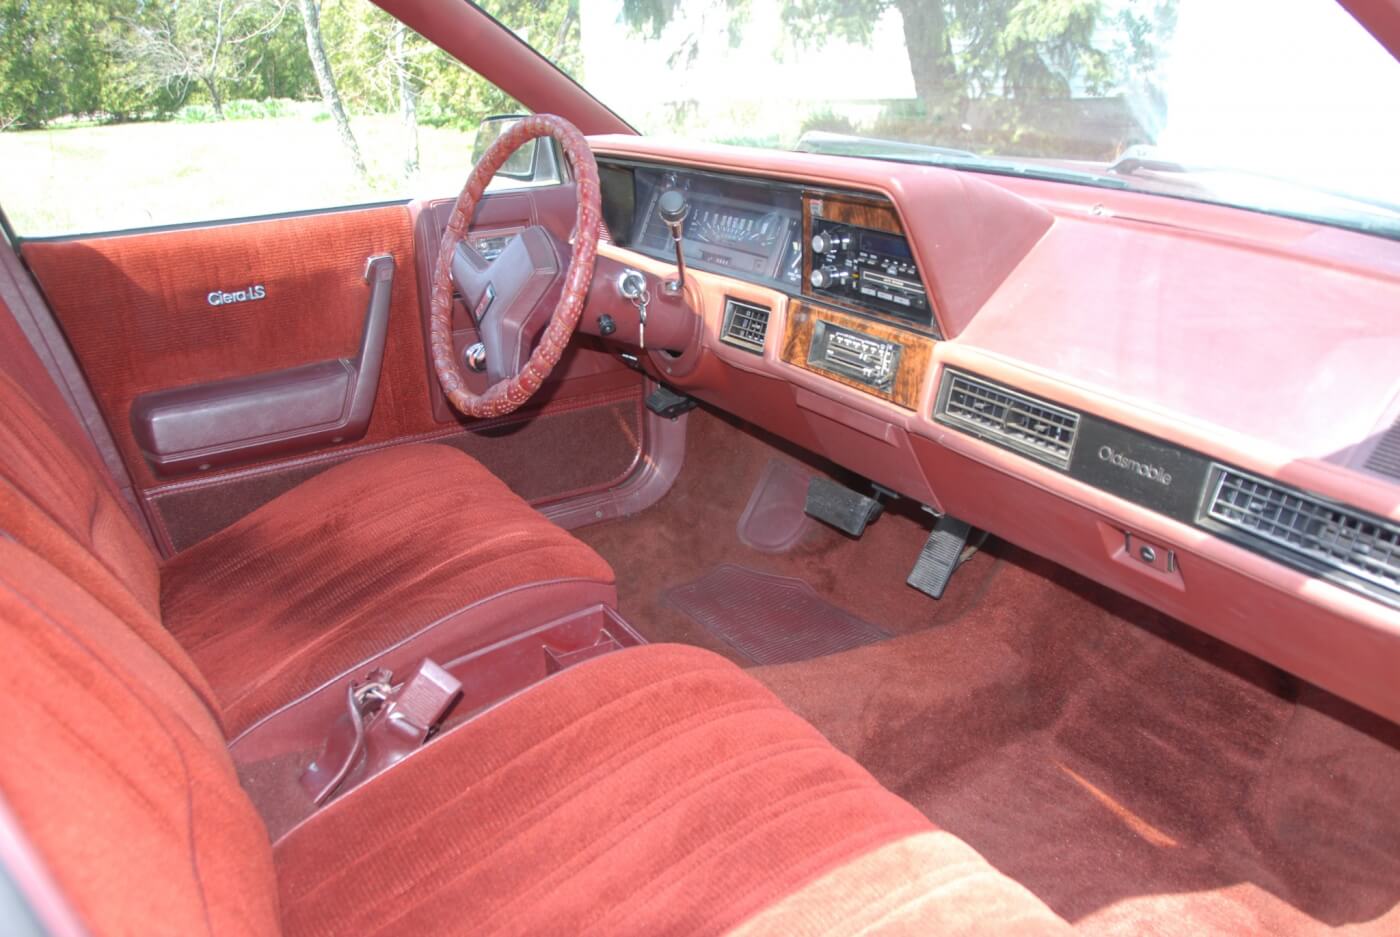 Even though this was the baseline interior, it’s not badly appointed. Diesel models had a lot of extra sound deadening to keep them quiet and comfortable. A/C was not standard but this car has it.